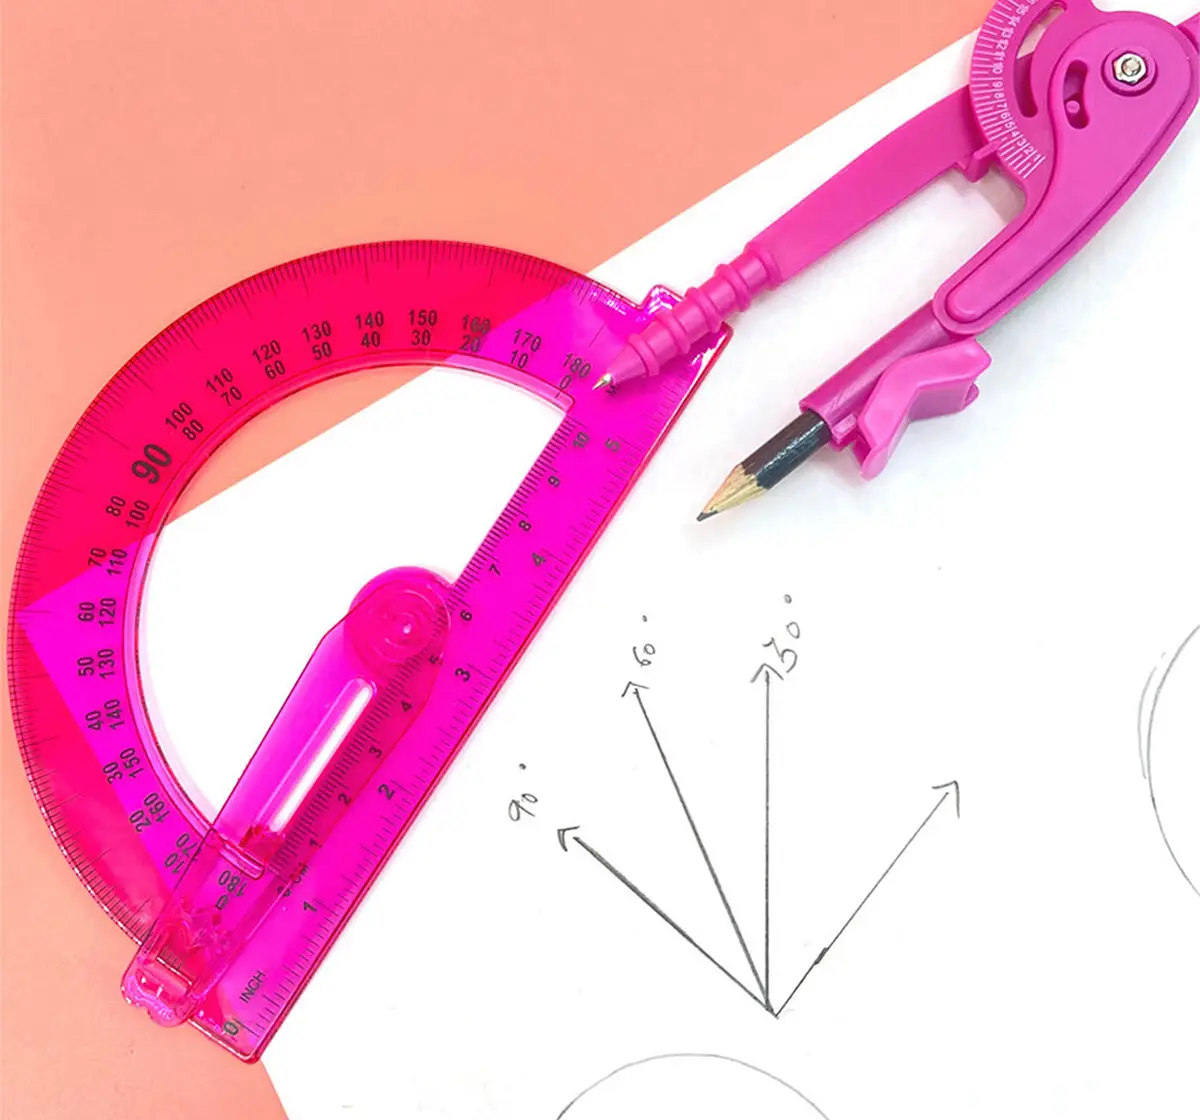 Scoobies BFF Compass and Protractor Set Pink, 3Y+